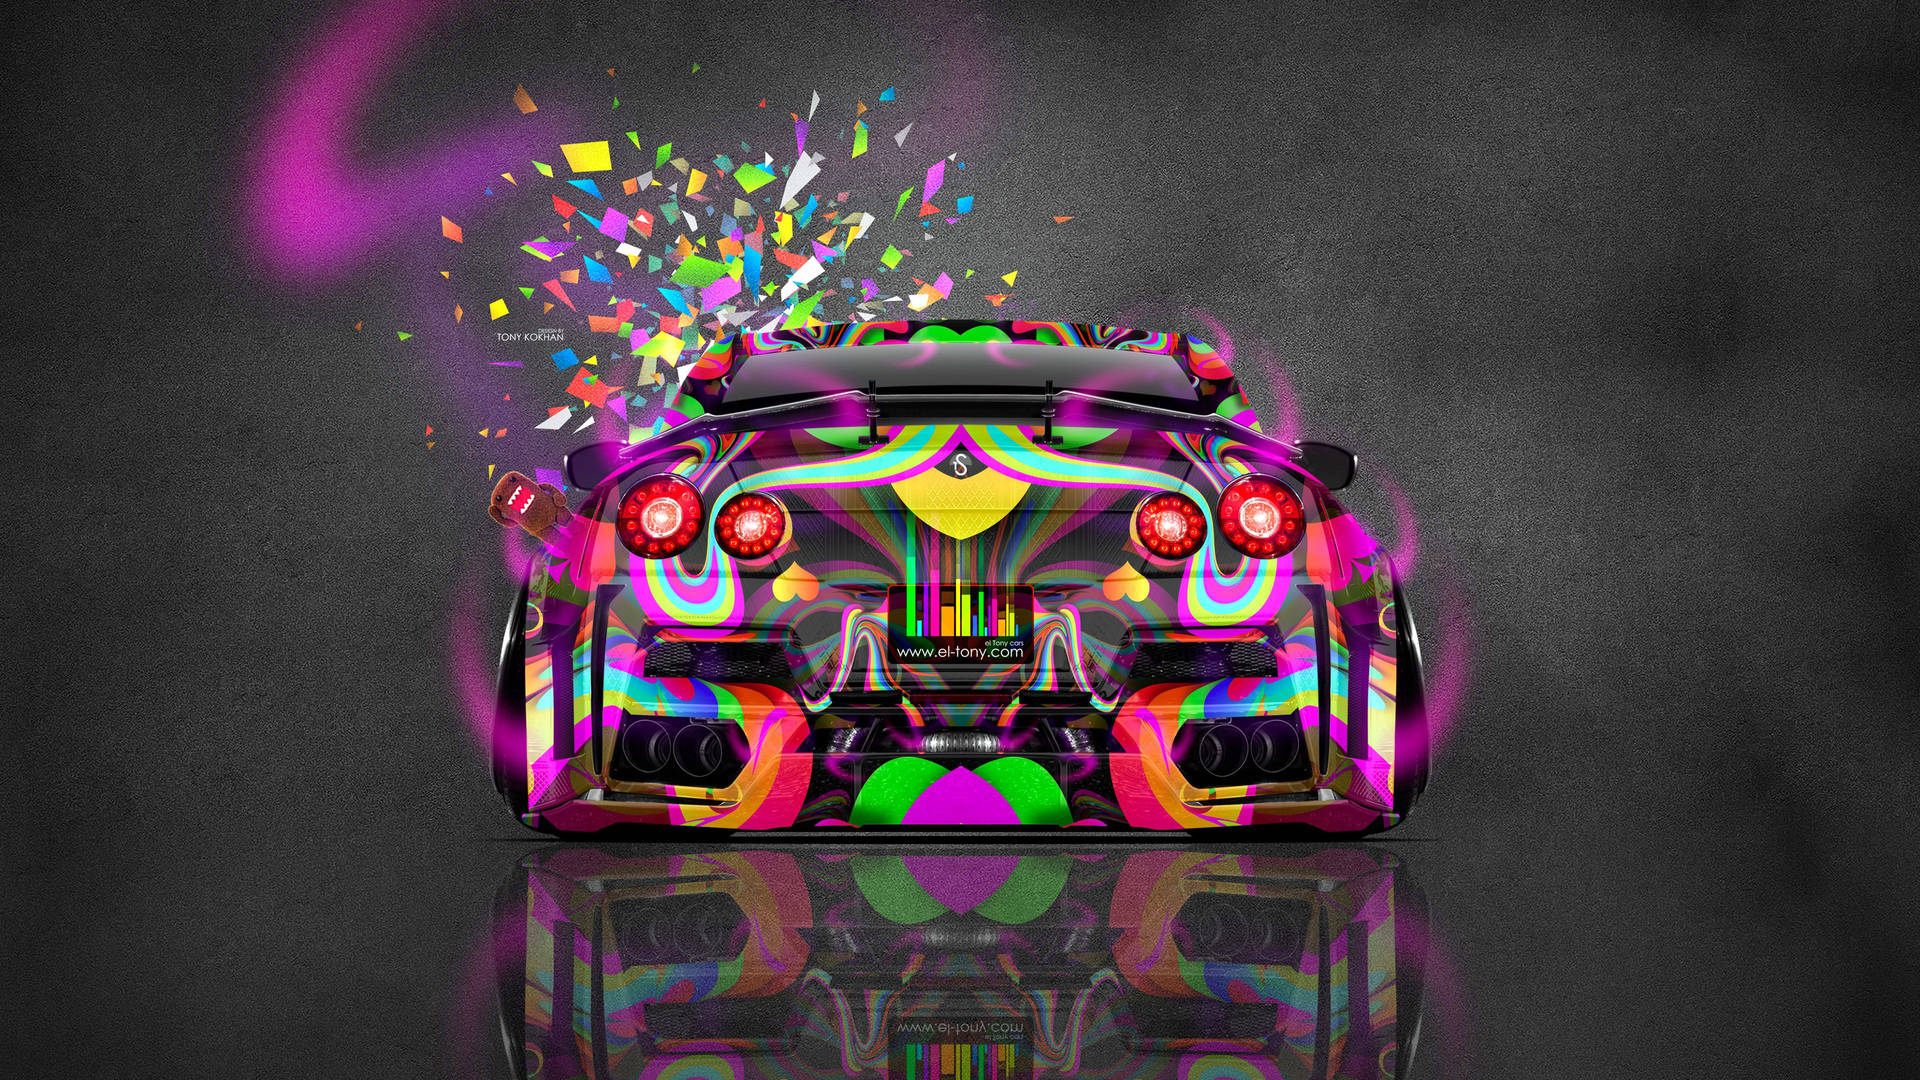 4k Jdm Nissan With Colorful Designs